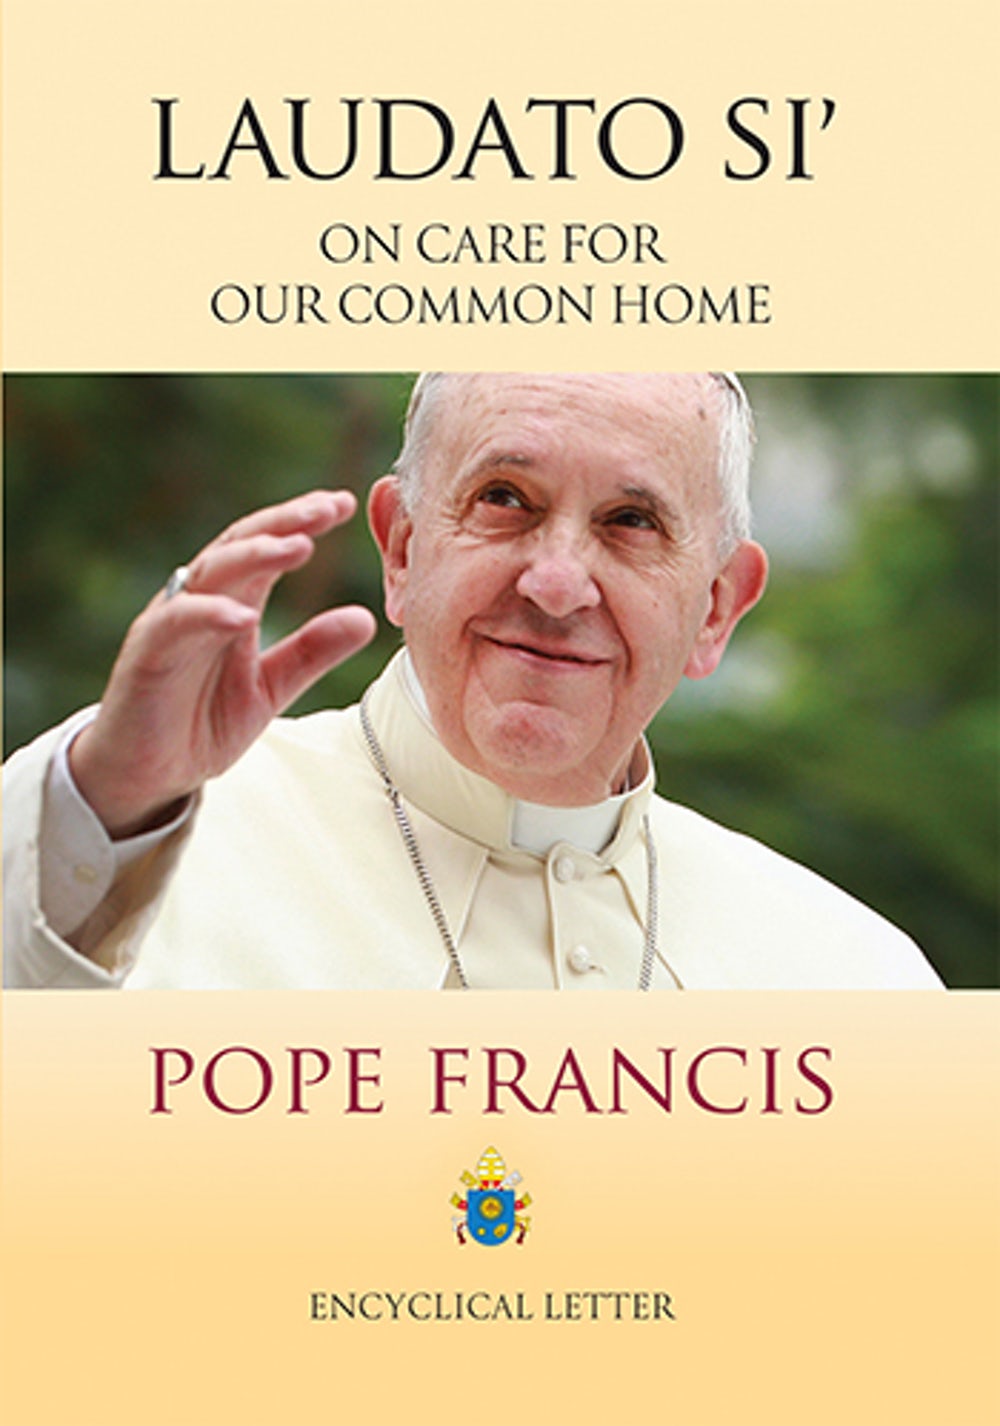 Laudato si': On Care for Our Common Home